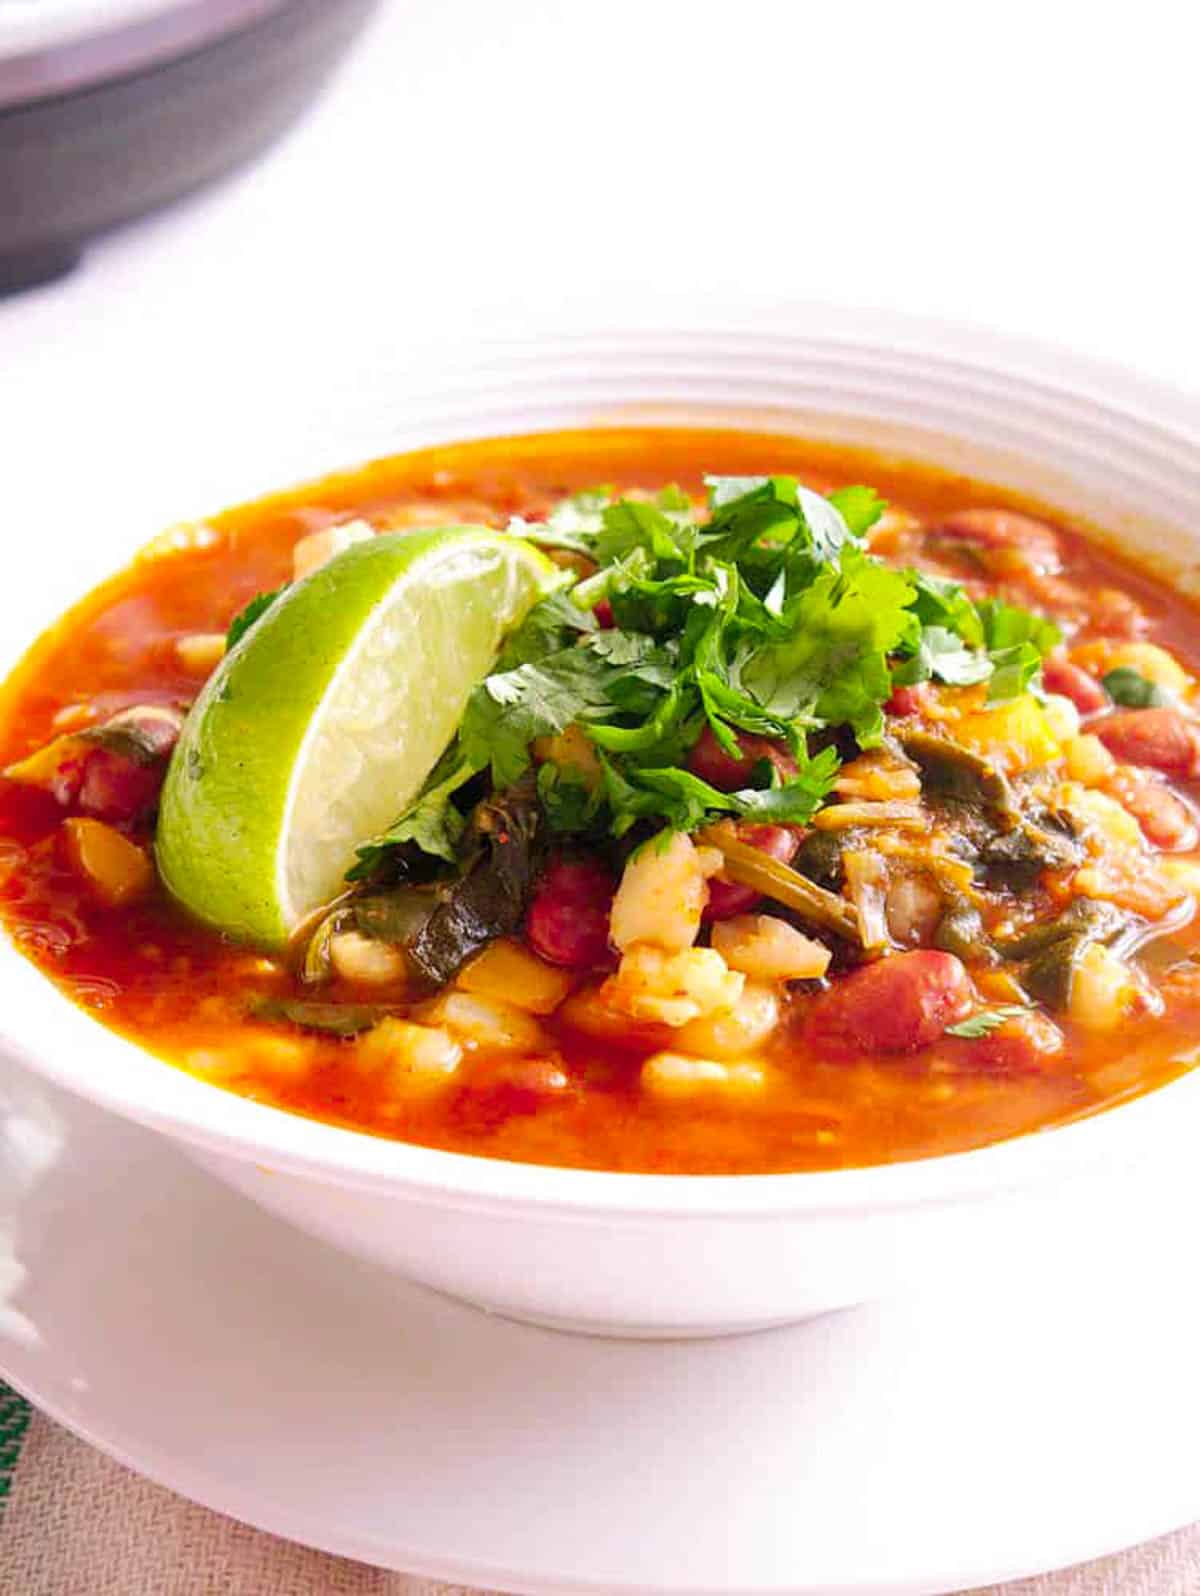 Vegan pozole rojo served in a white bowl, garnished with lime and cilantro.